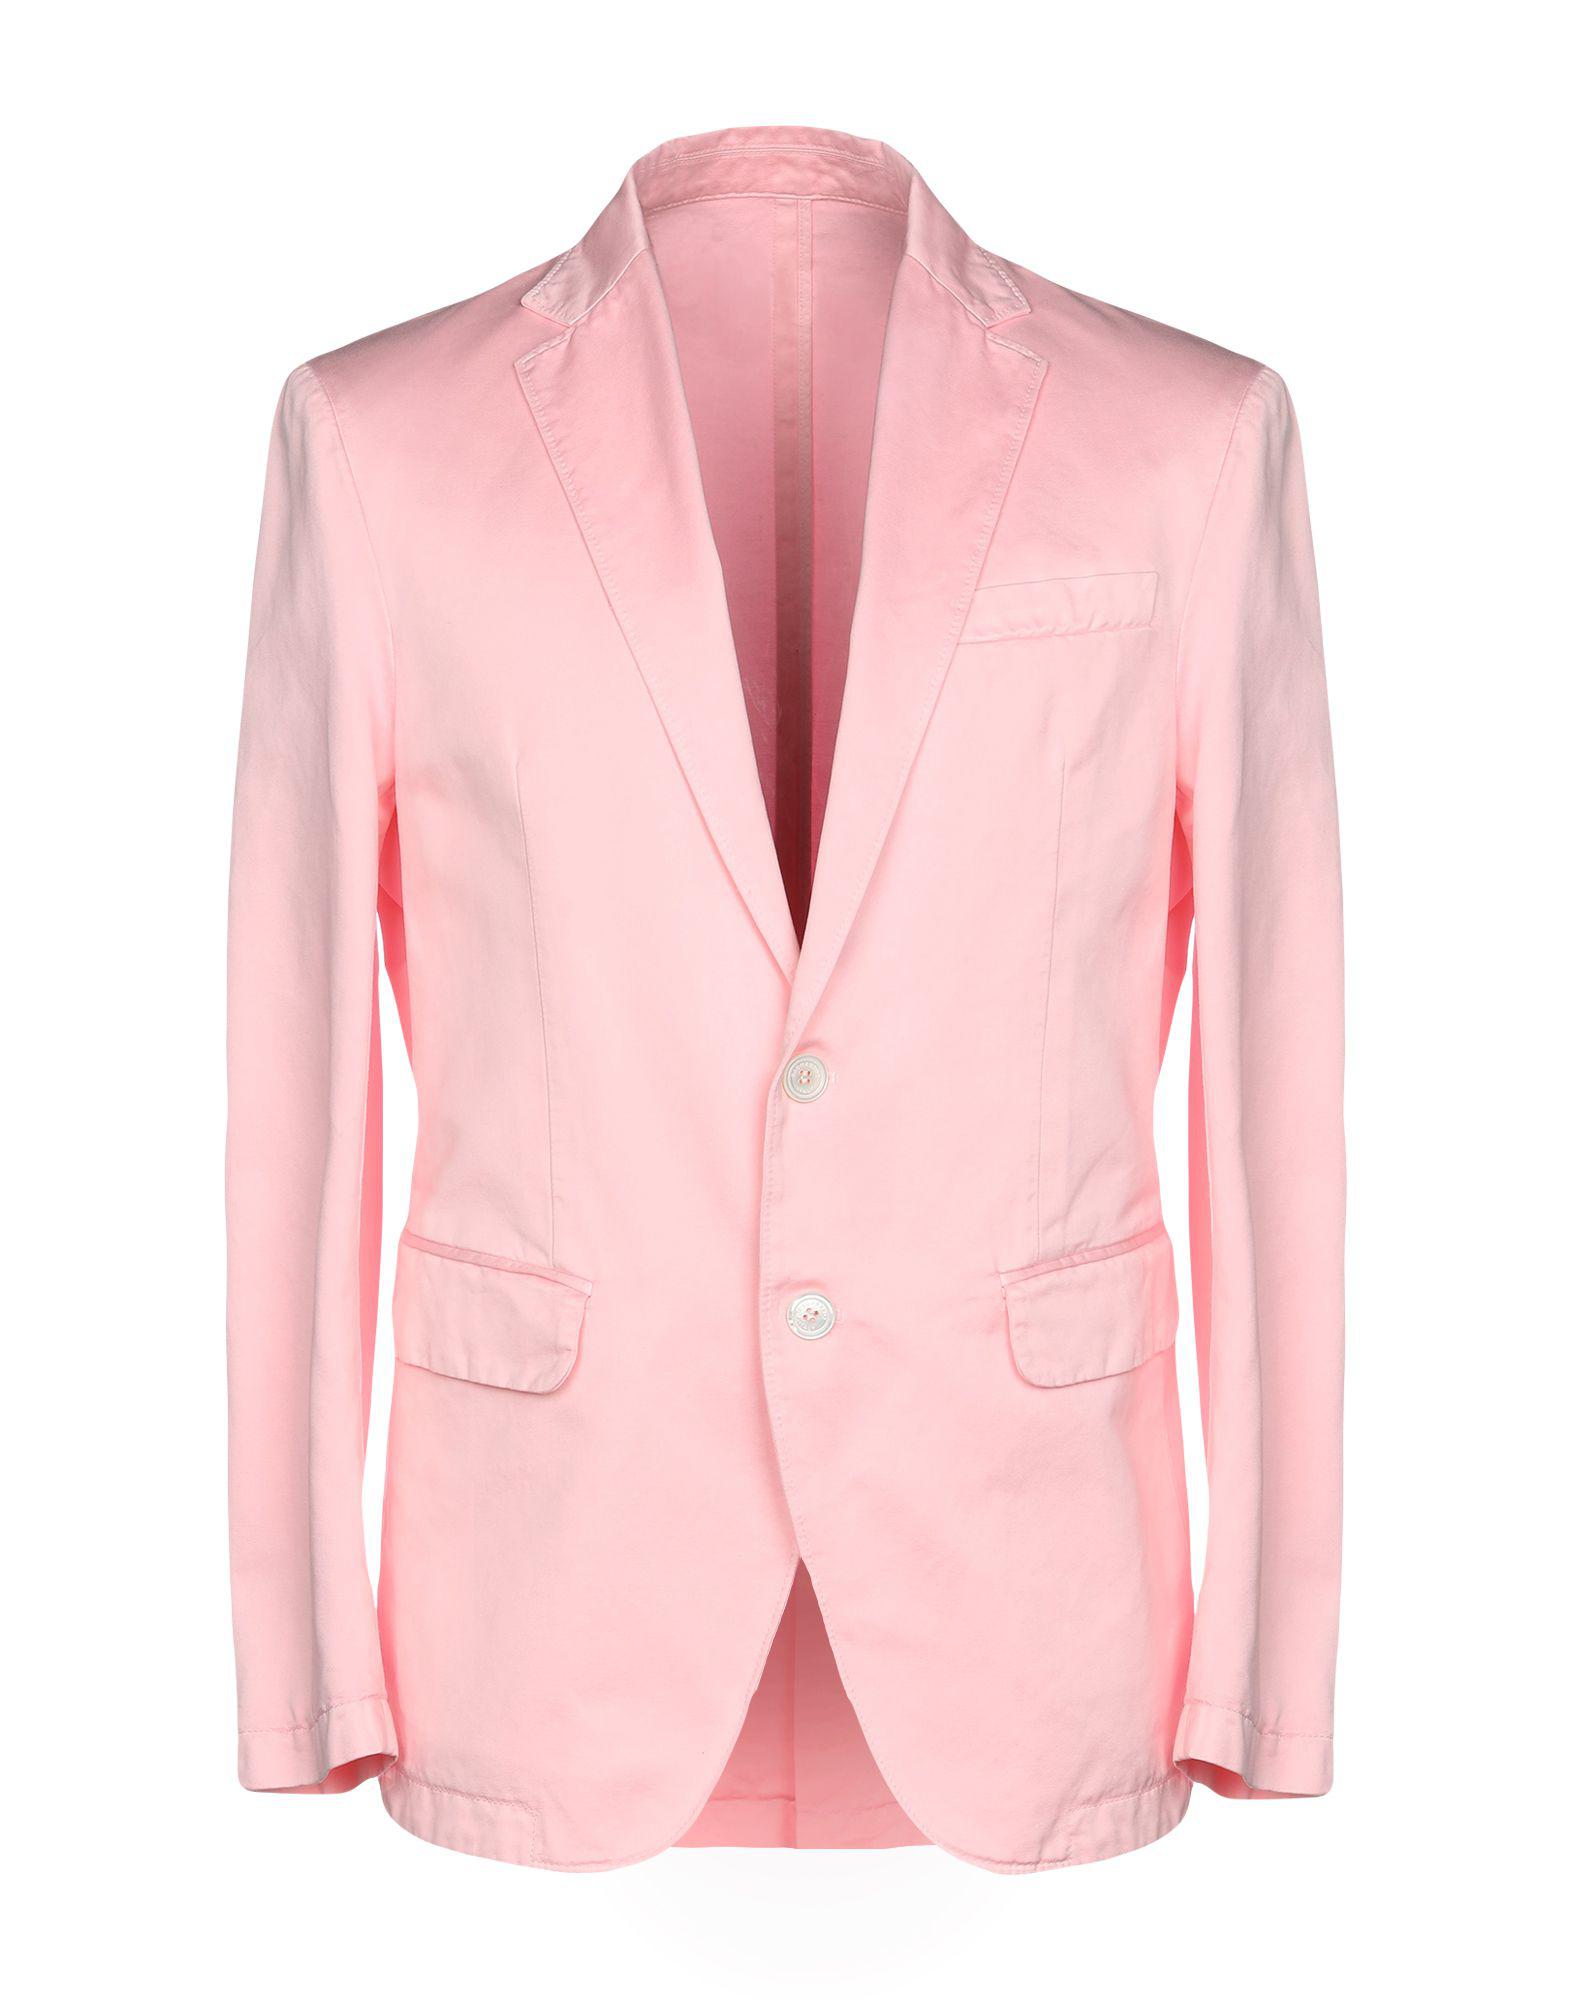 DSquared² Cotton Blazer in Pink for Men - Lyst